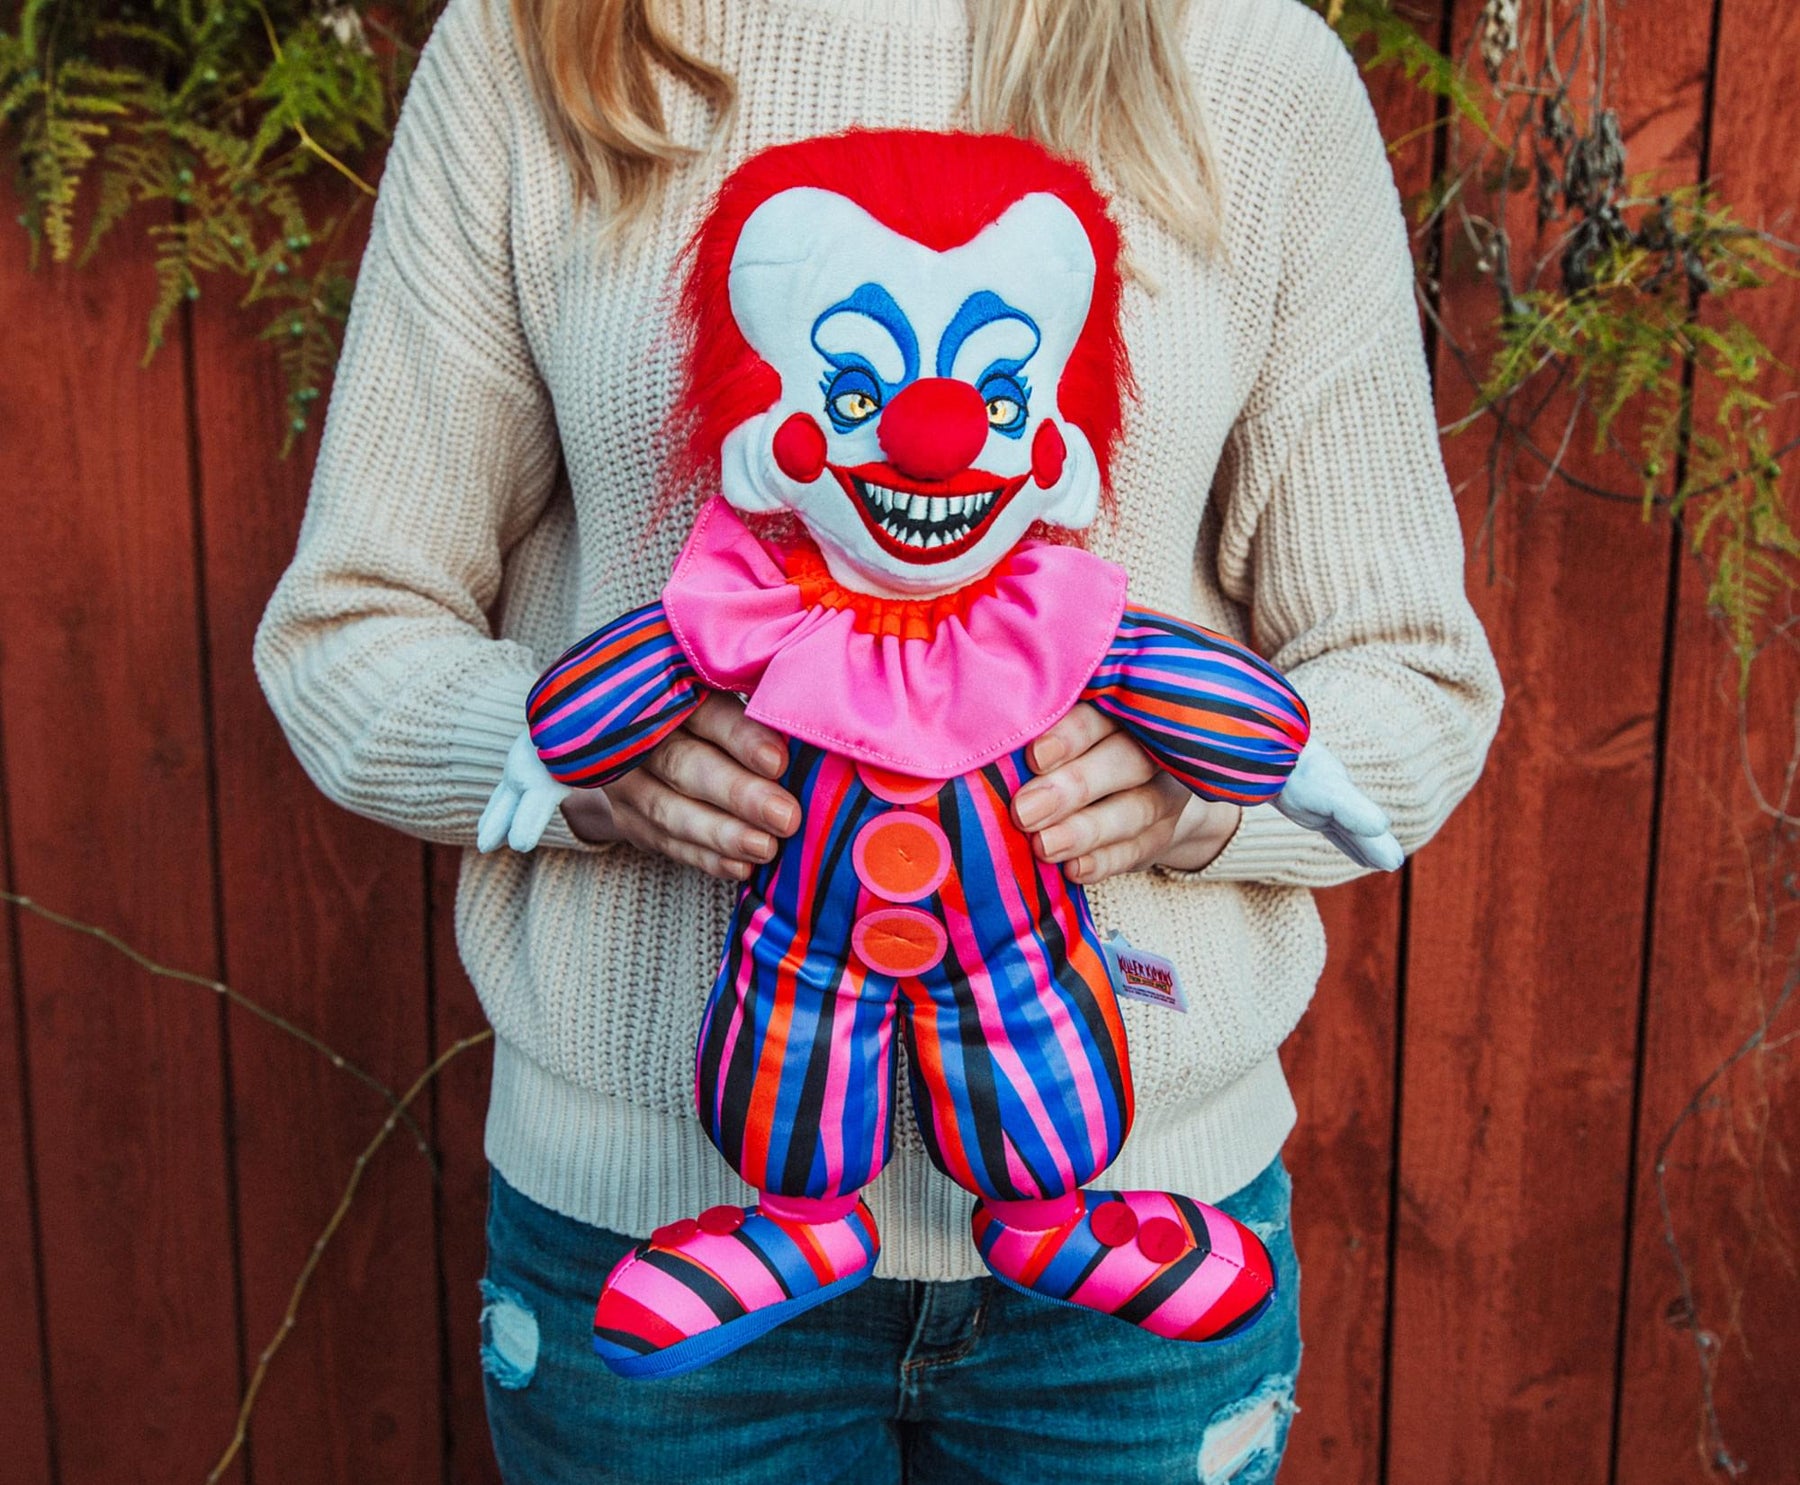 Killer Klowns From Outer Space 14-Inch Collector Plush Toy | Rudy